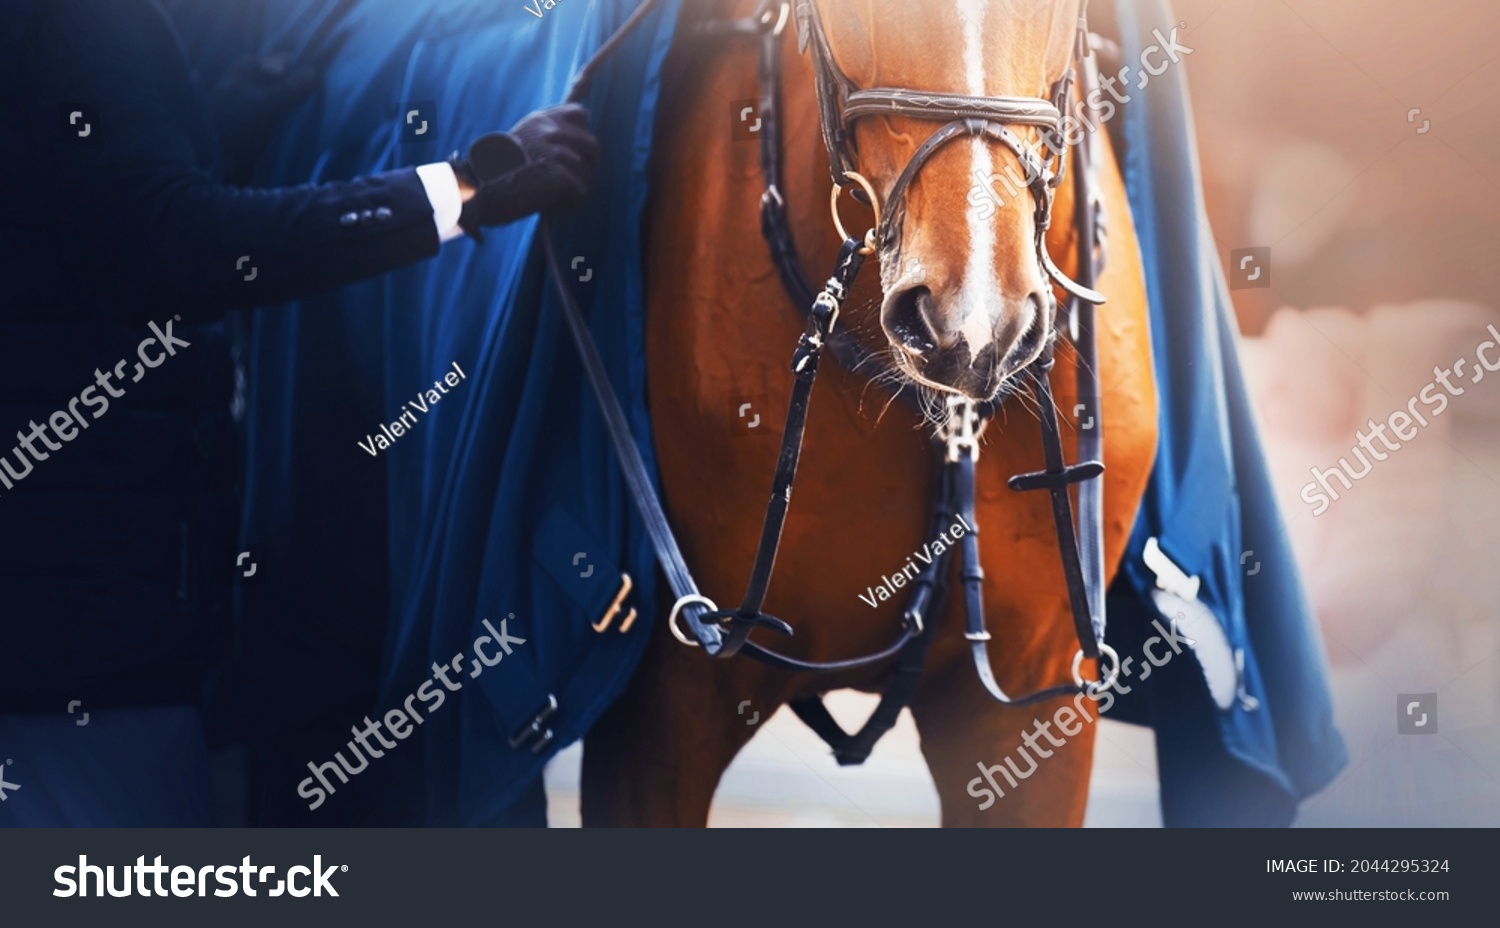 The sorrel horse is wearing a bridle and a blue warm blanket, and a rider stands next to him and adjusts the straps with his hands. Equestrian sports. Horse riding. #2044295324